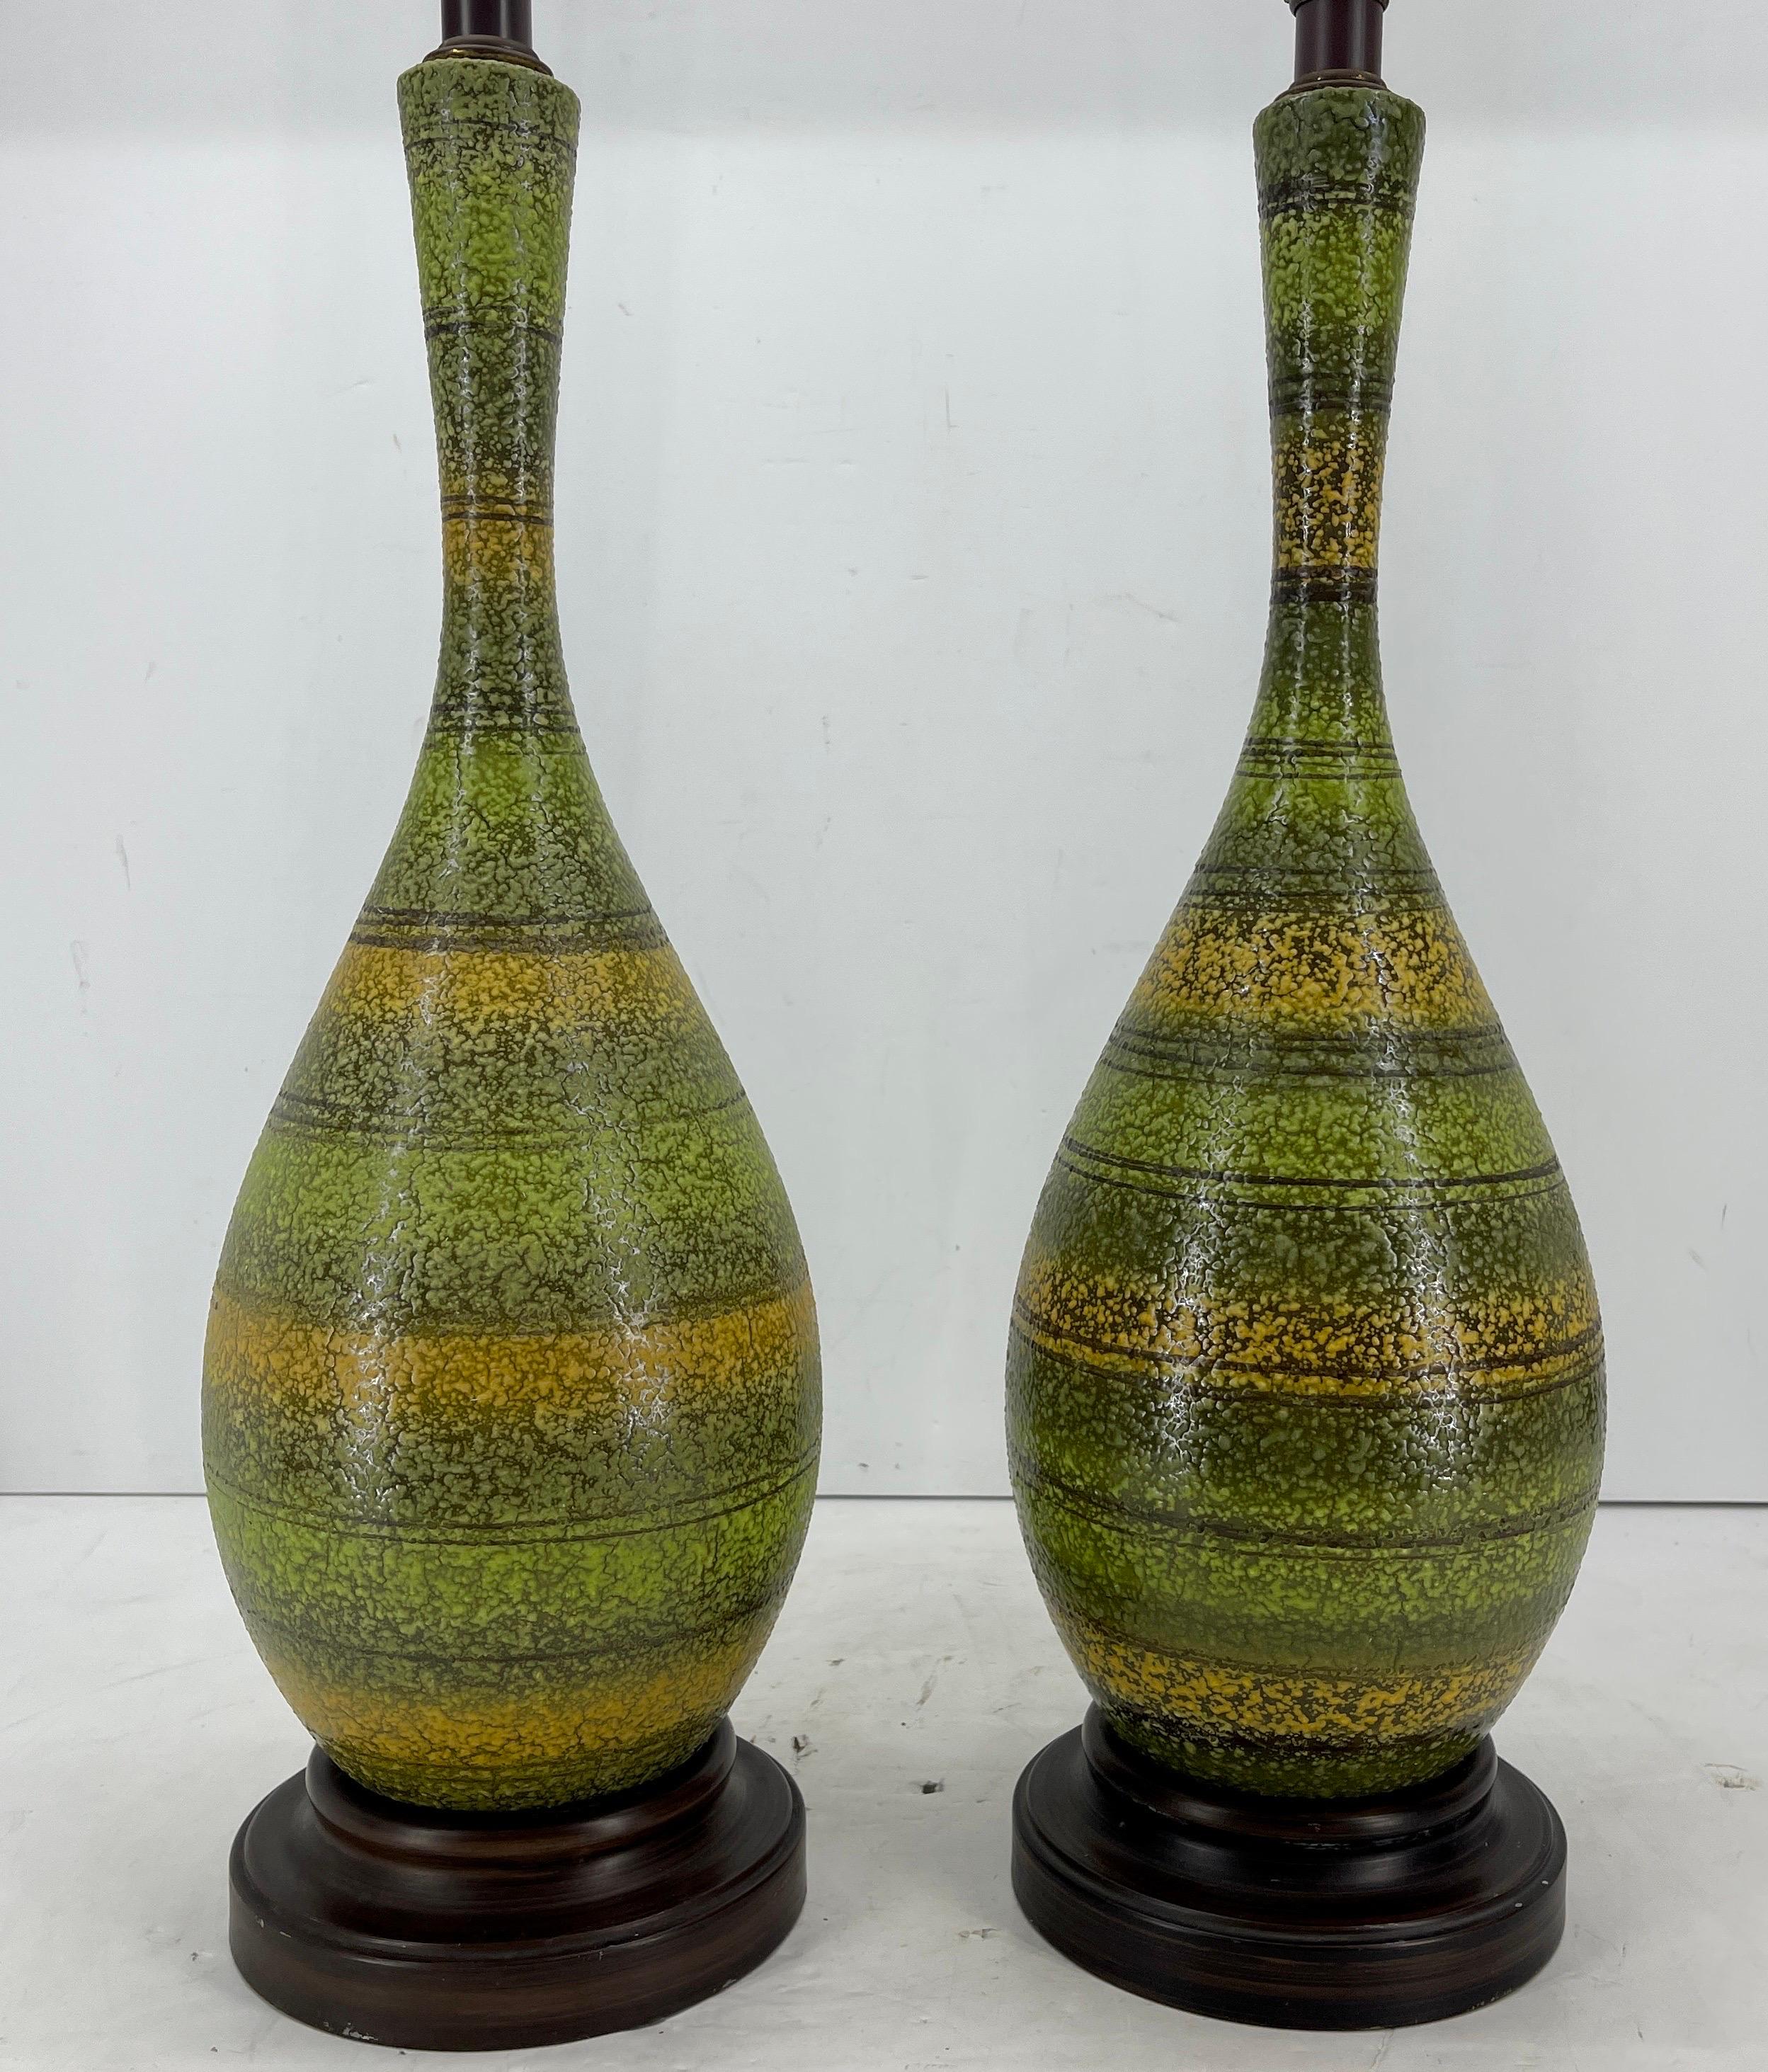 Mid-Century Modern Pair of Green Yellow Striped Textured Table Lamps

Very versatile pair of ceramic lamps in several shades of green as well as yellow exemplifying the mid-century time period. The bases of the unique lamps are metal. Perfect